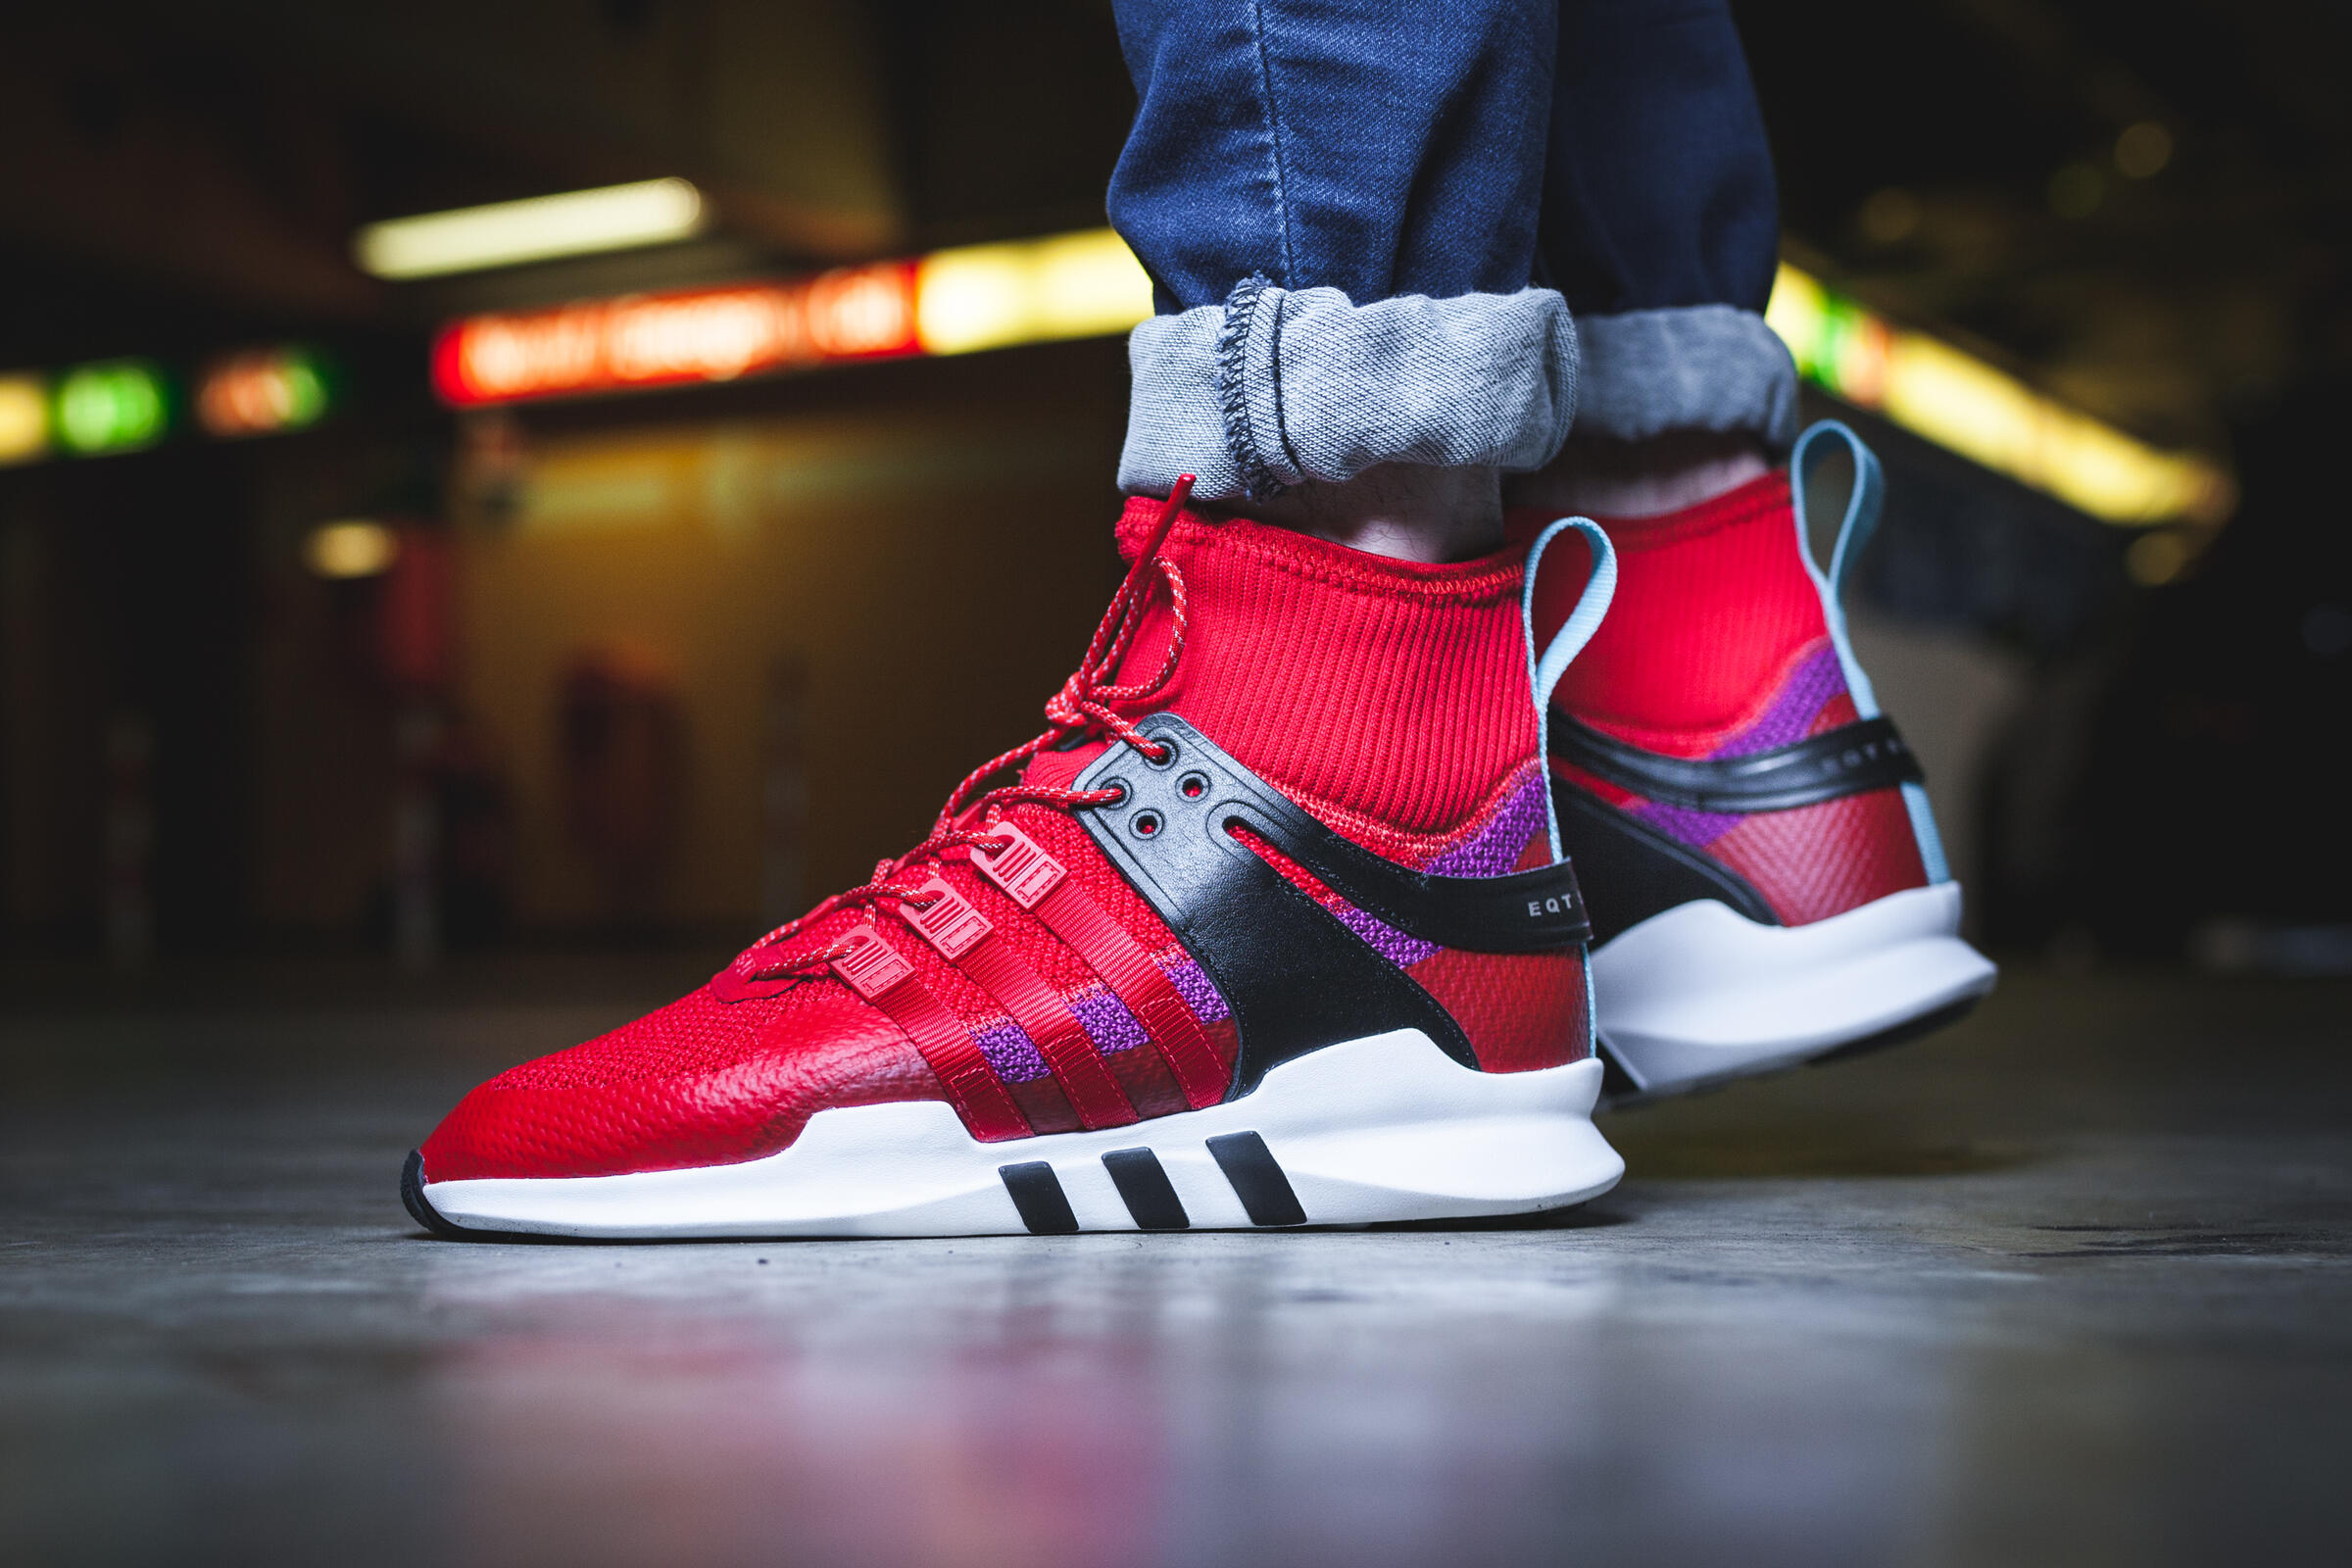 adidas Performance EQT Support Adventure Pack "Scarlet"